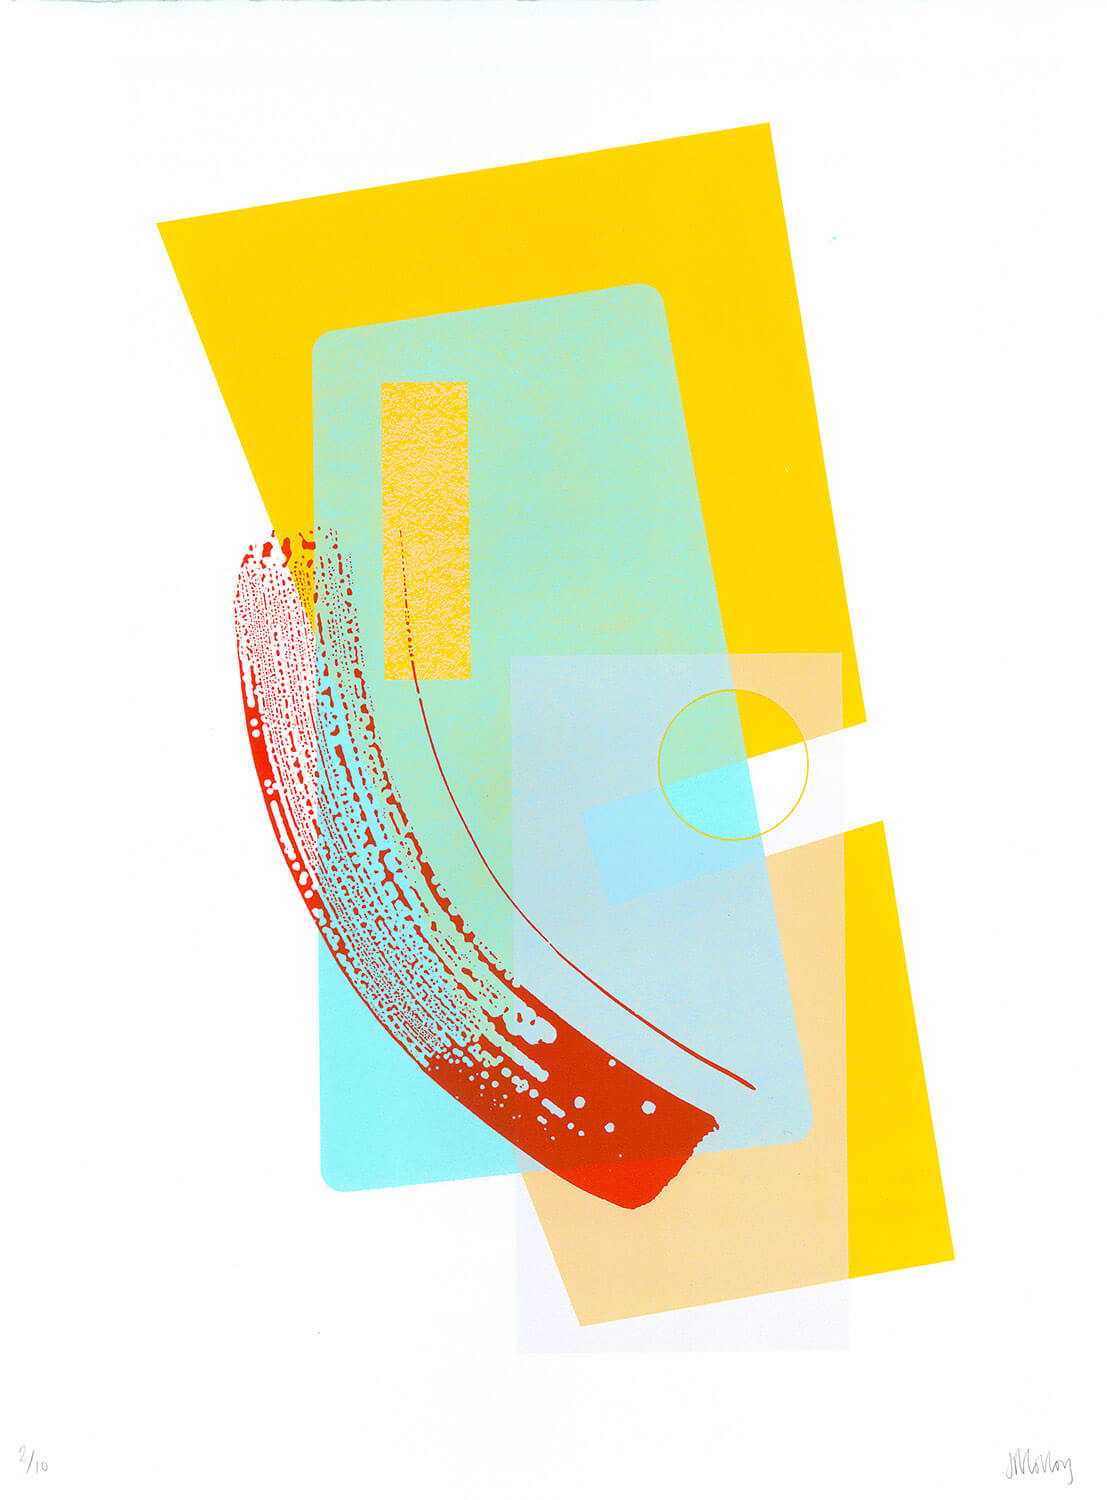 Abstract pop art screenprint in yellow & green, with red brushstroke effect, in a limited edition by Josie Blue Molloy